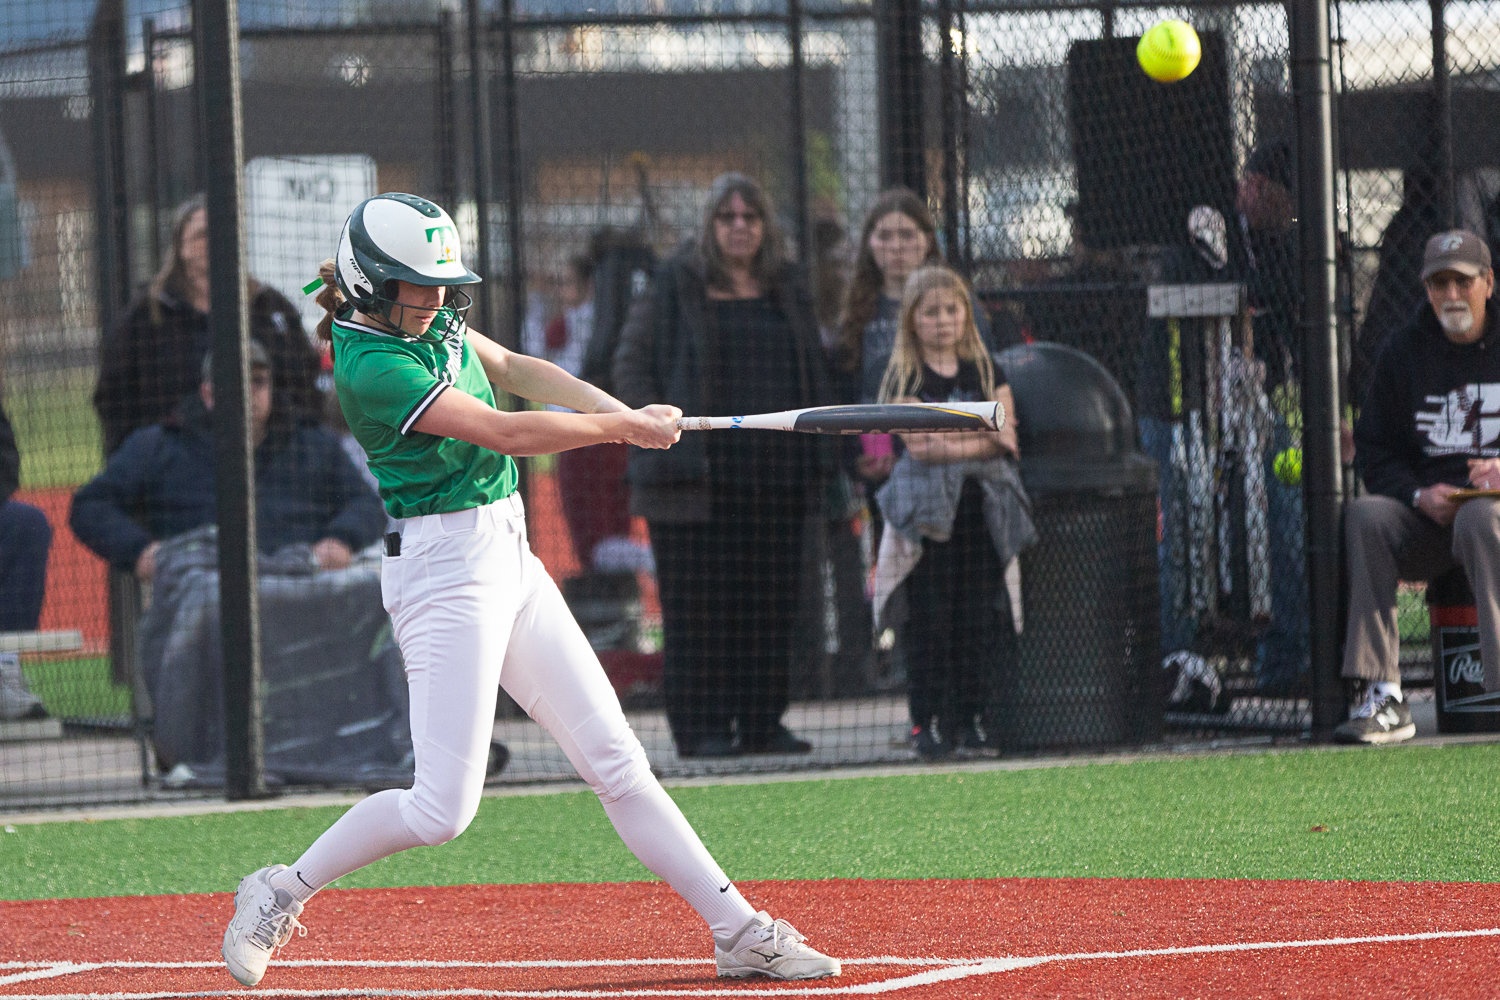 Kylie Waltermeyer loops a triple down the line in the first inning of Tumwater's 3-2 loss to W.F. West at Rec Park on March 22.